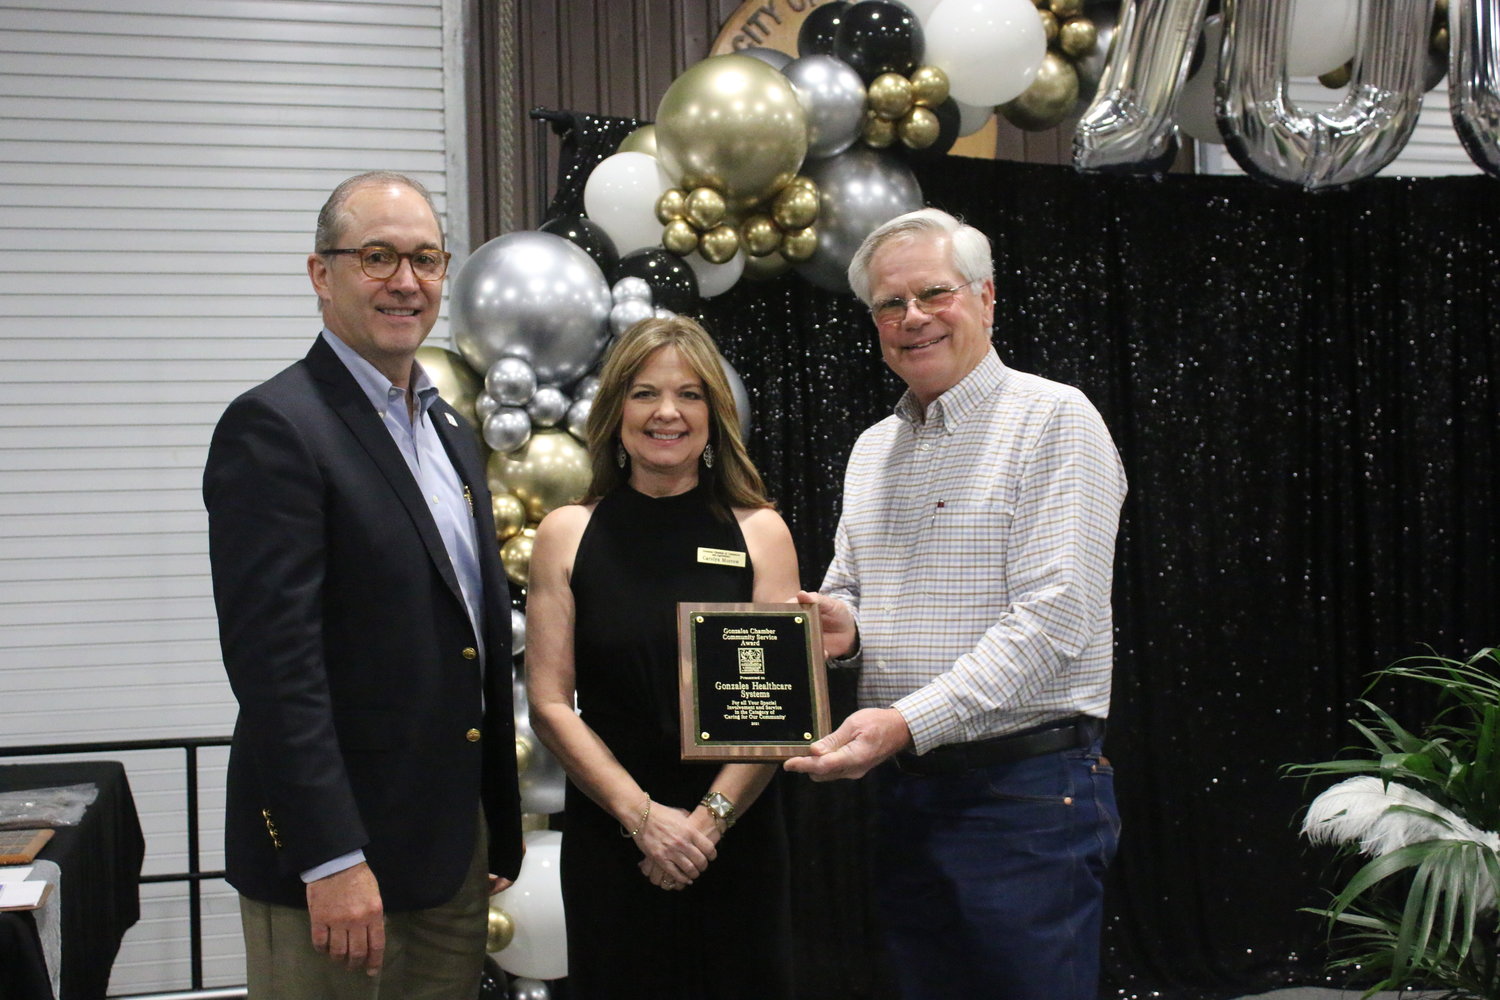 Gonzales Chamber of Commerce & Agriculture incoming president Carolyn Morrow, center, presents the Community Service Award to Dr. Commie Hisey, left, and Kenneth Gottwald, board president, of Gonzales Healthcare Systems at Thursday’s banquet. The hospital system was recognized for taking the lead in helping the community get vaccines to fight COVID-19.